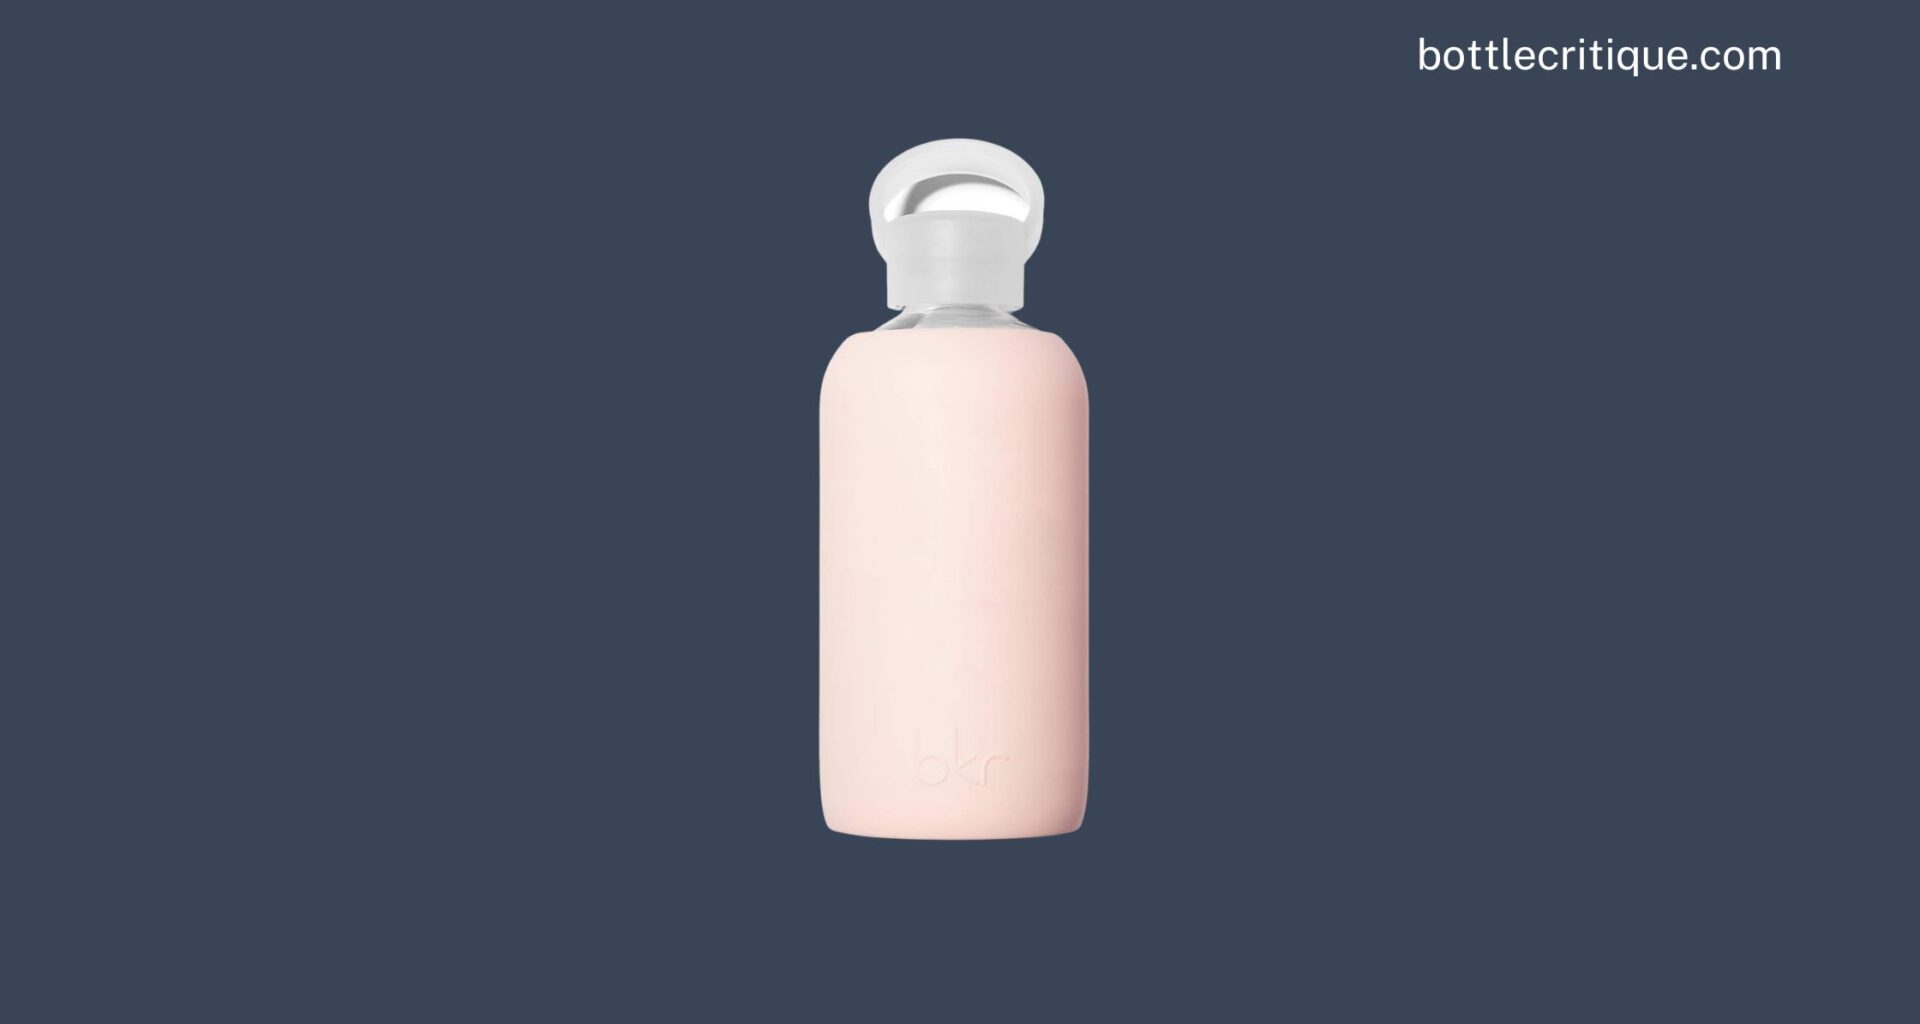 How to Wash Bkr Water Bottle?